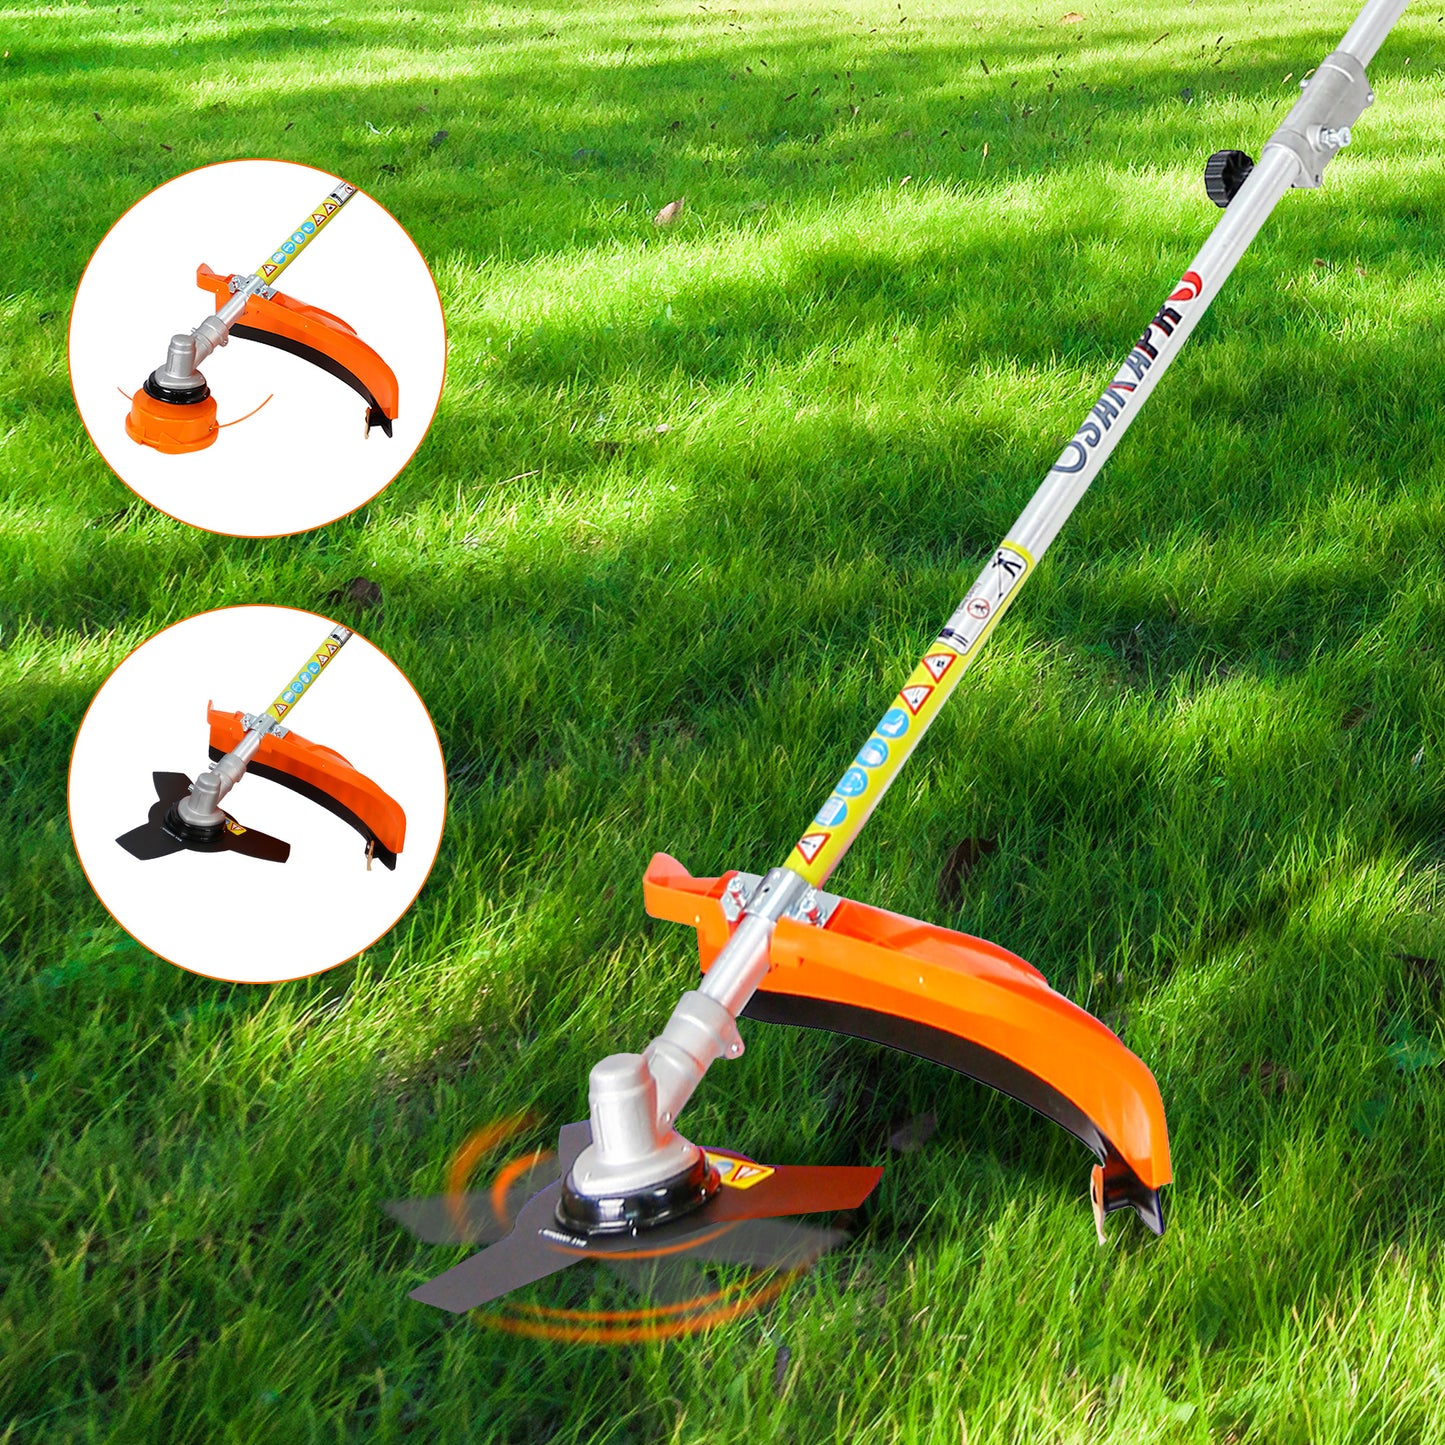 SYNGAR 33CC 2-Cycle Weed Eater, 4-in-1 Gas Powered Full Crank Shaft String Trimmer with Gas Pole Saw, Hedge Trimmer and Brush Cutter, Trimming Tool System for Grass Lawn Garden Yard Care, Y013